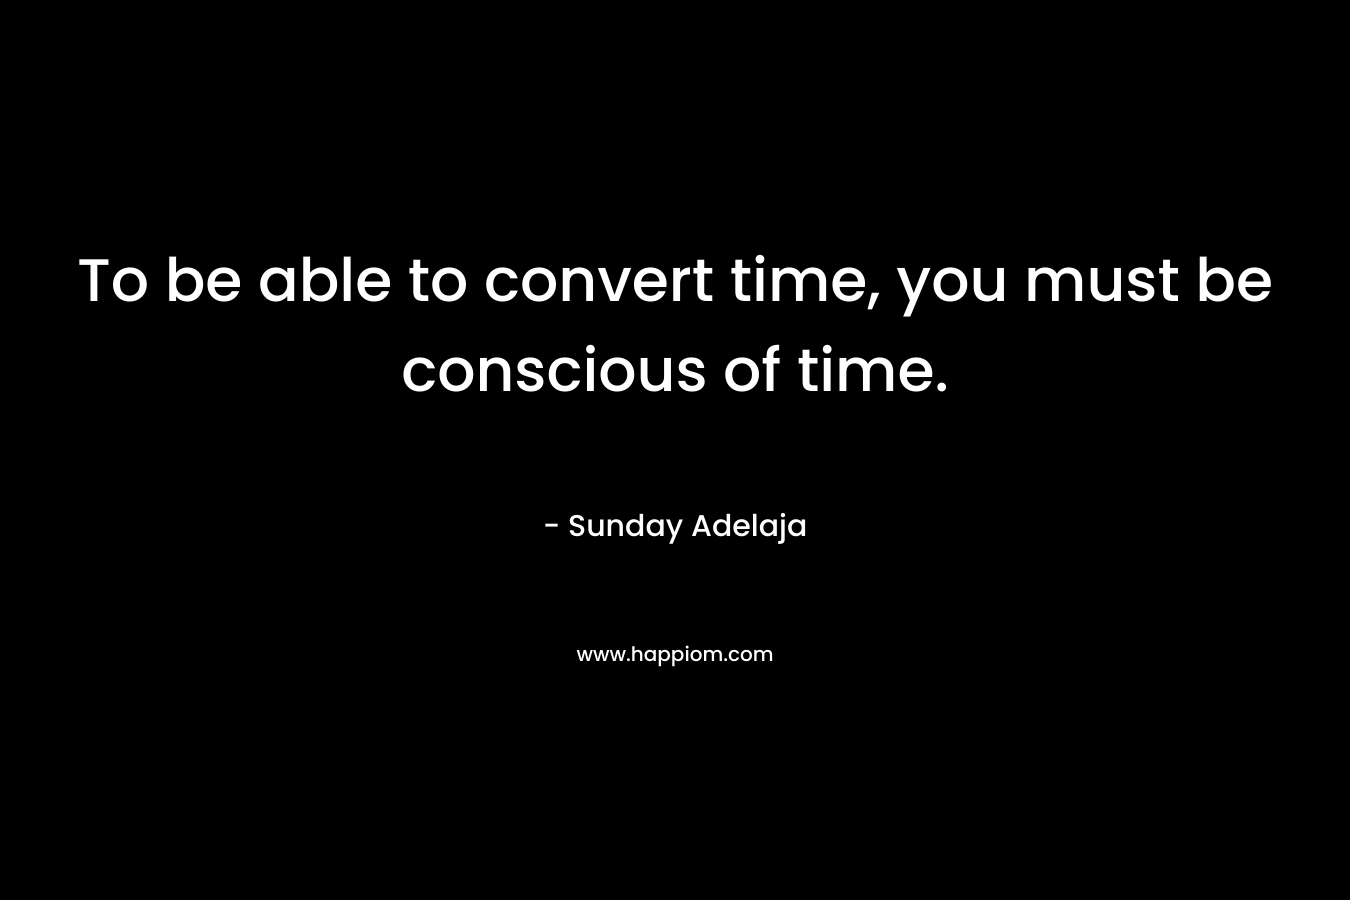 To be able to convert time, you must be conscious of time.